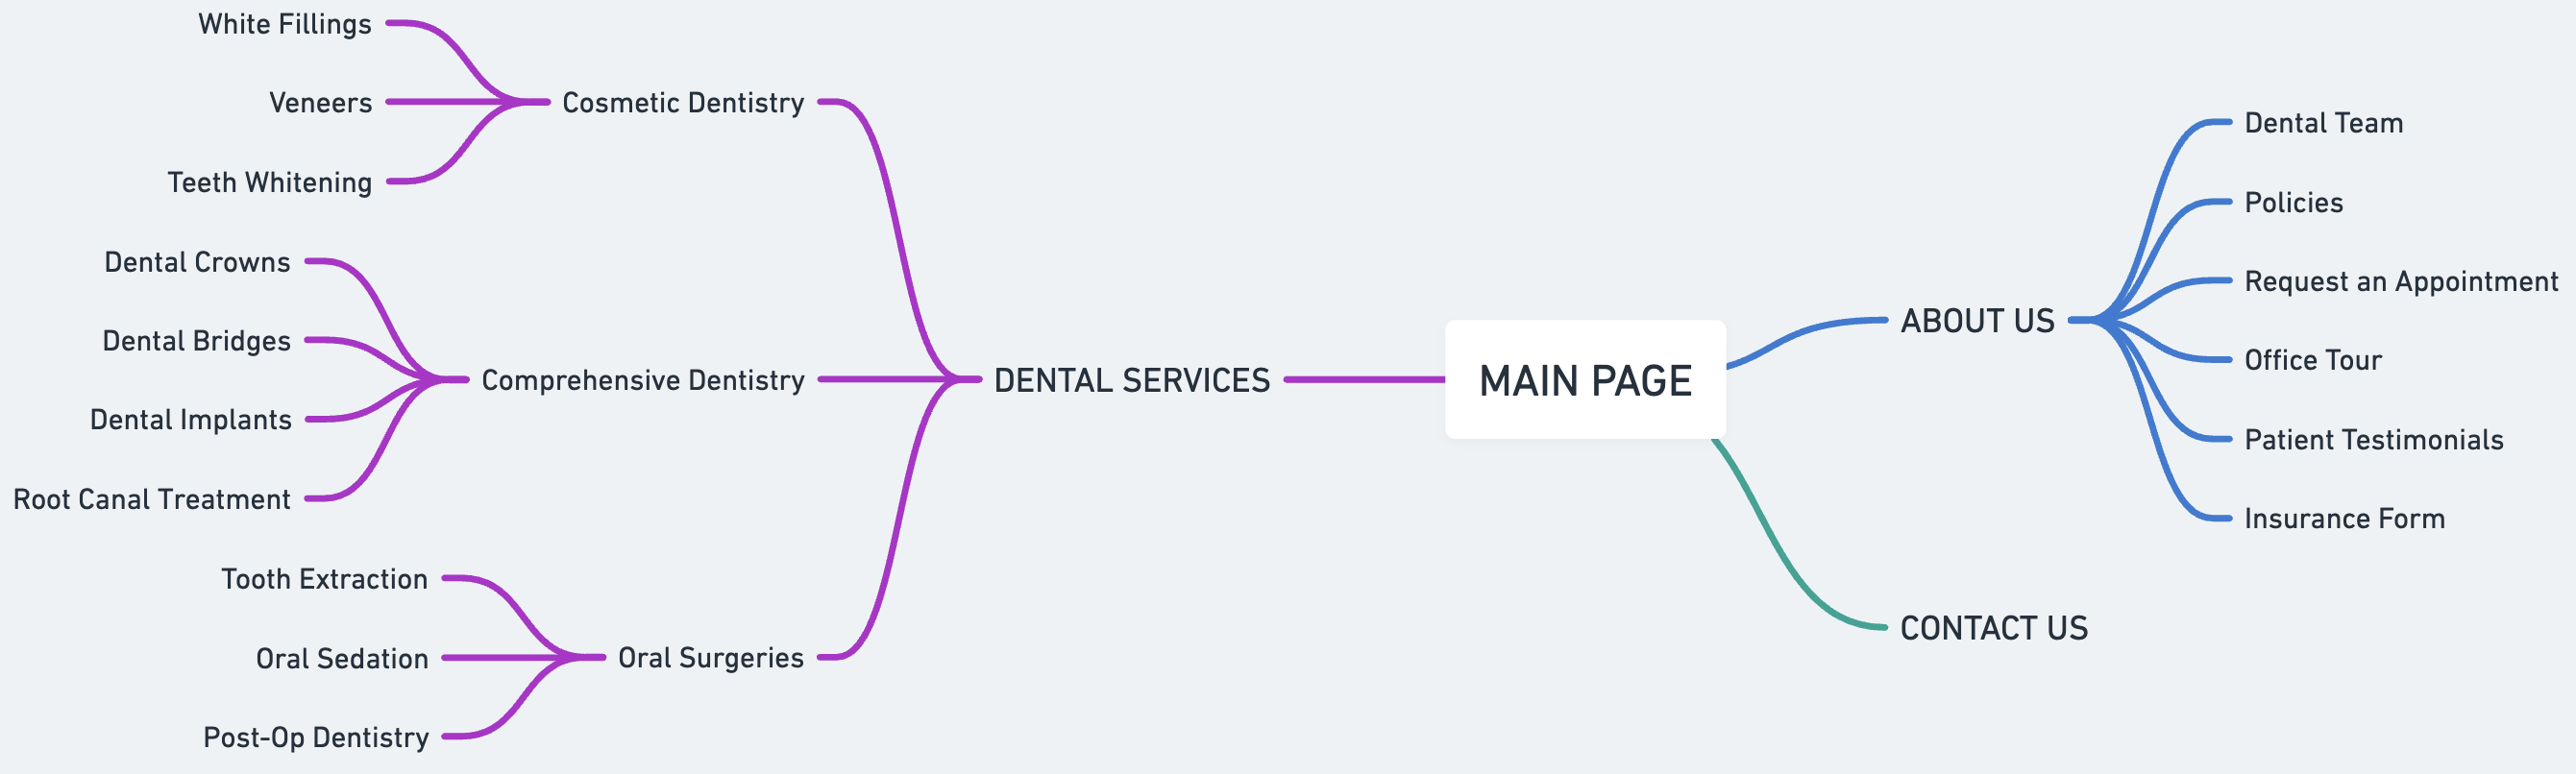 Perfect example of SEO optimized website structure for dental website